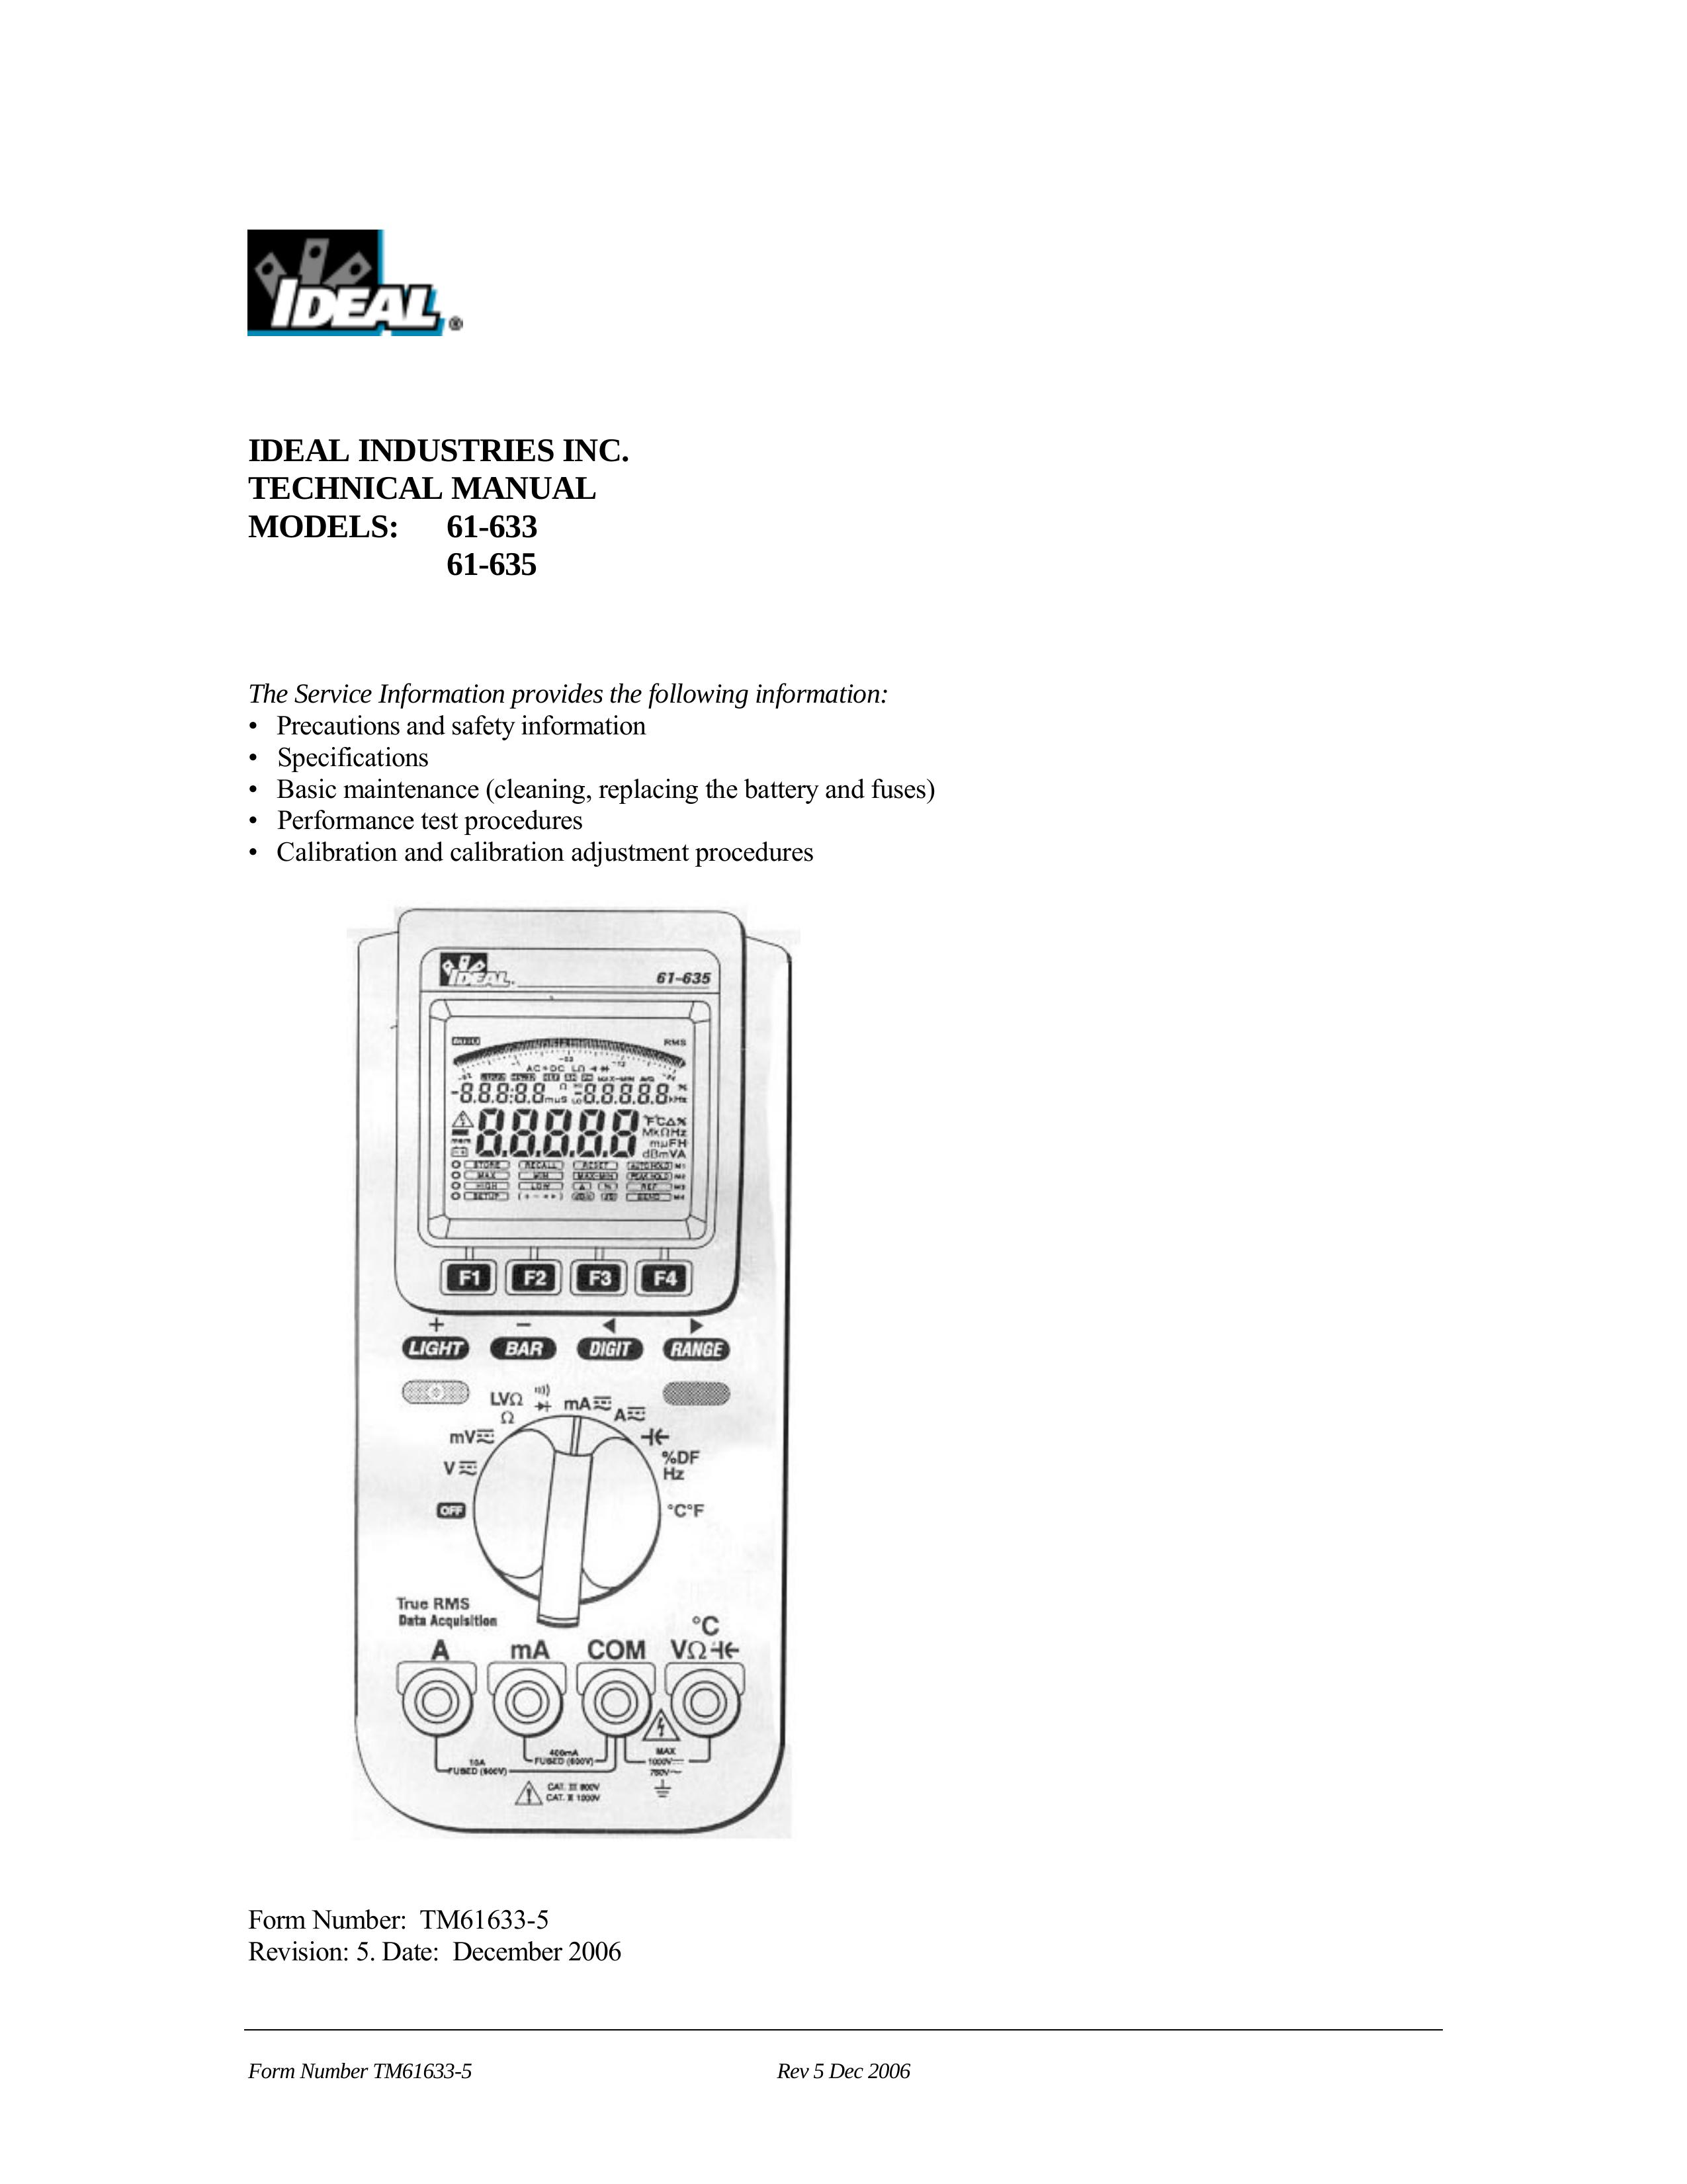 IDEAL INDUSTRIES 61-633 Thermometer User Manual